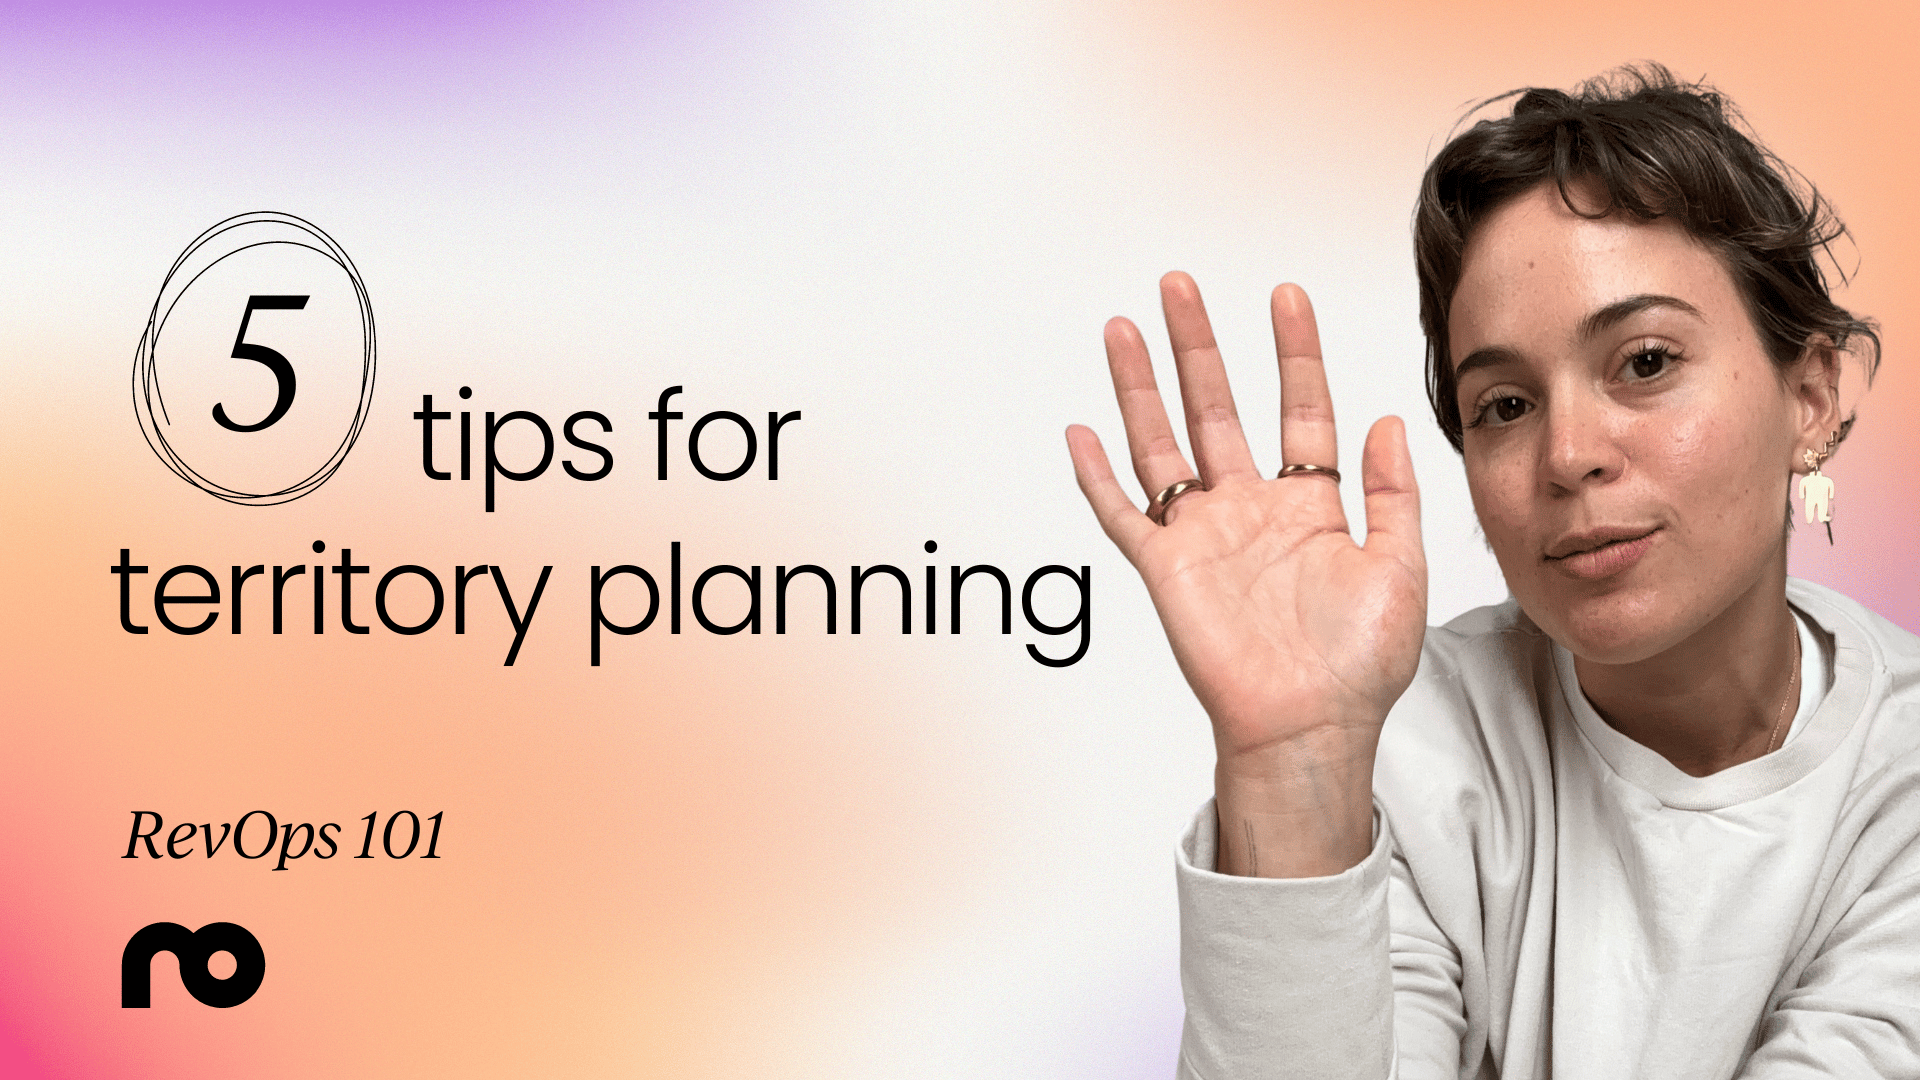 5 tips for territory planning